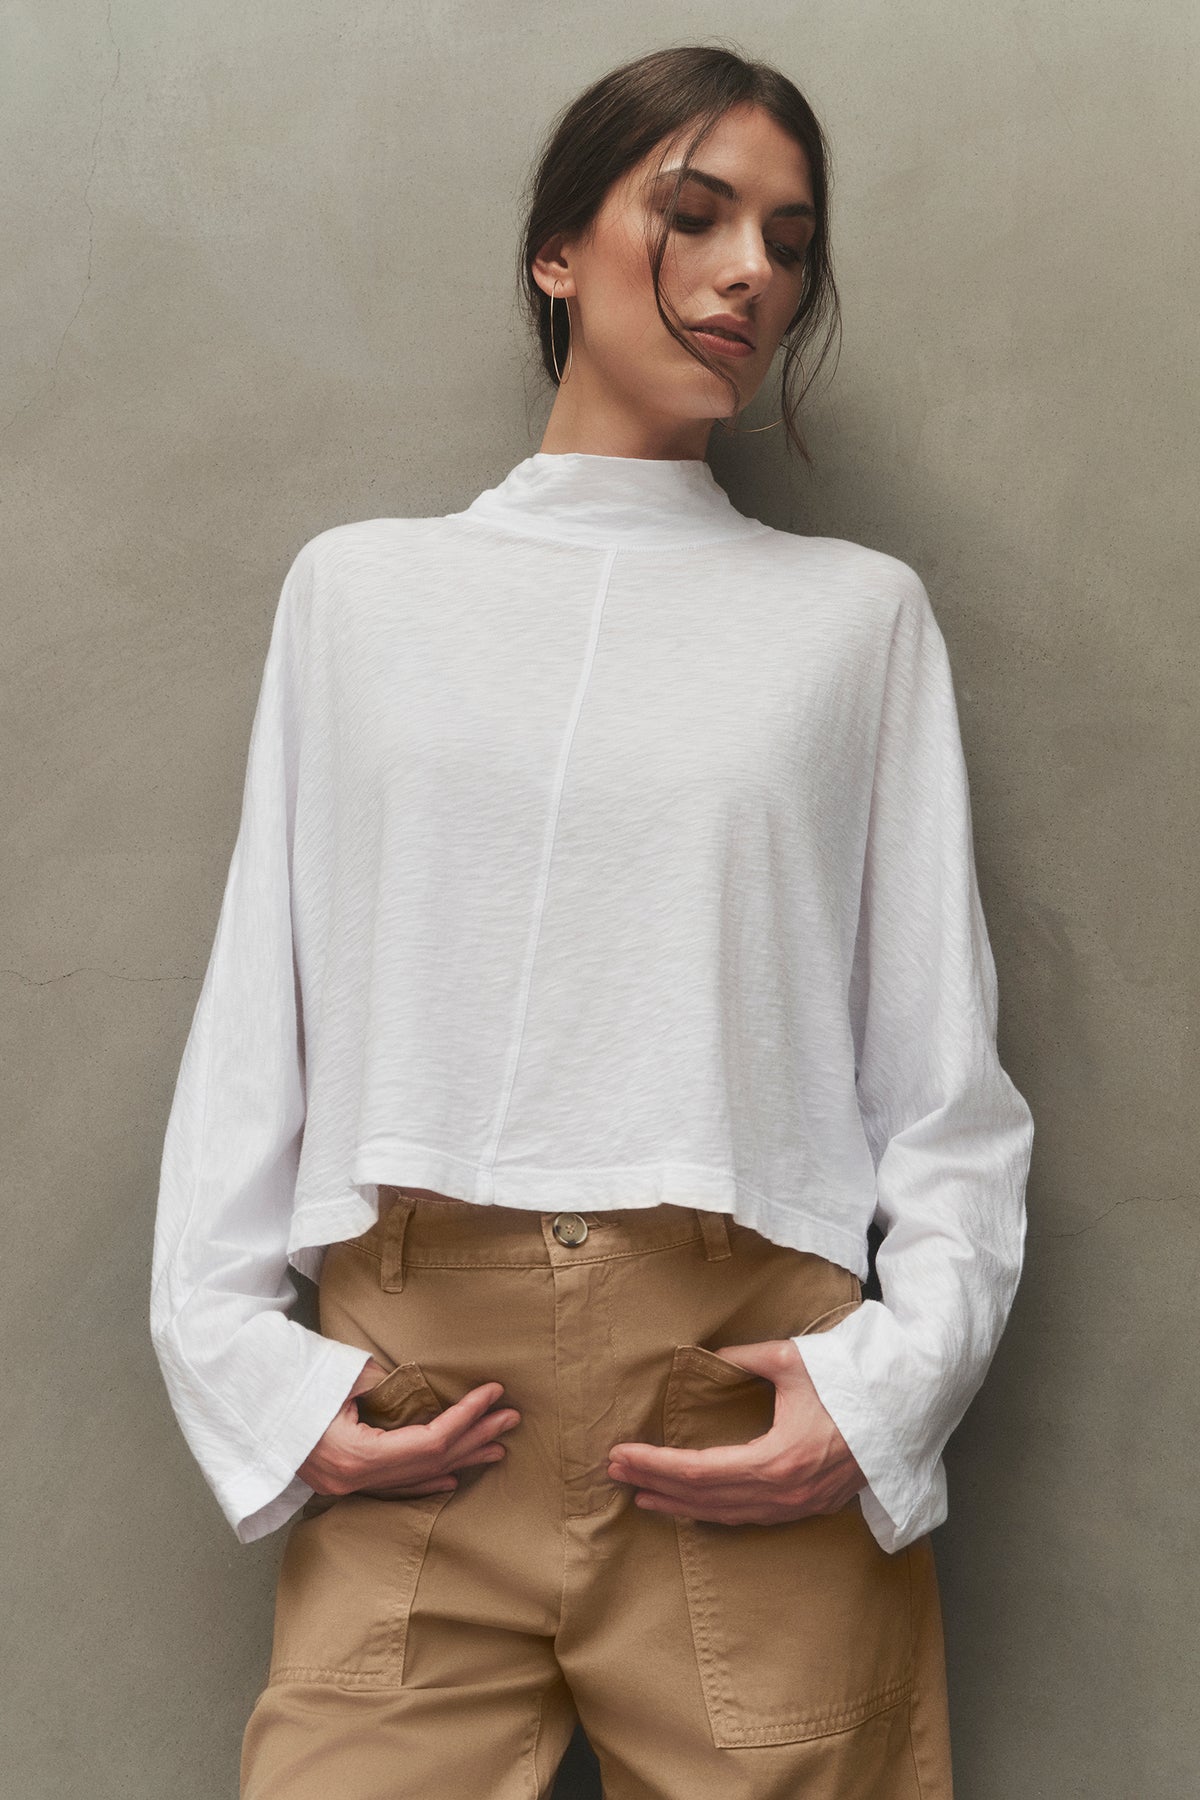 The model is wearing a white STACEY MOCK NECK TEE by Velvet by Graham & Spencer and tan pants.-26883549462721